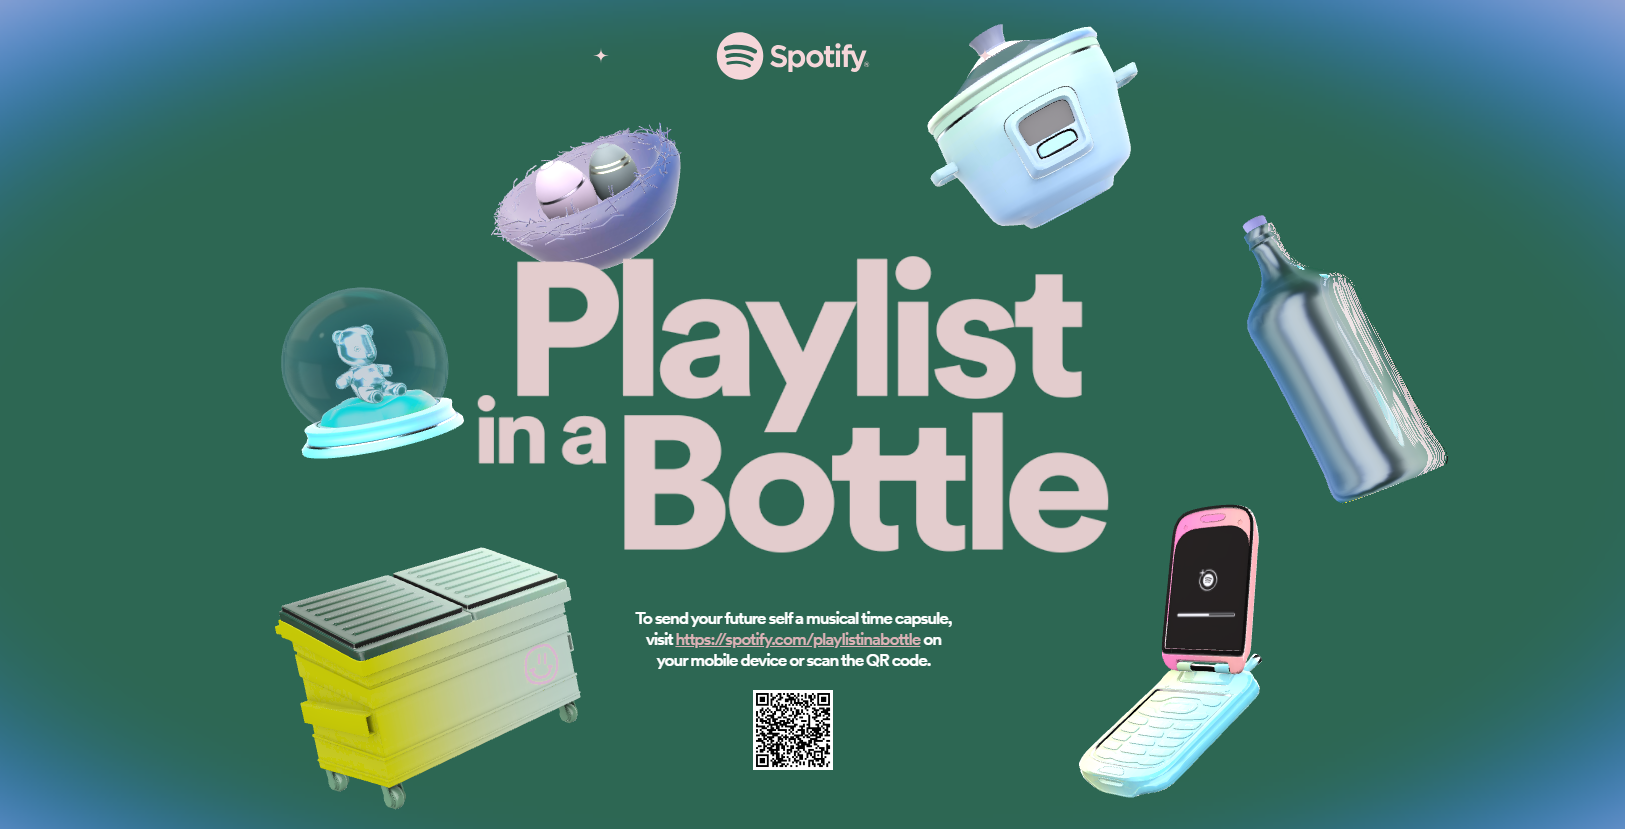 Creating a Spotify Playlist in a Bottle